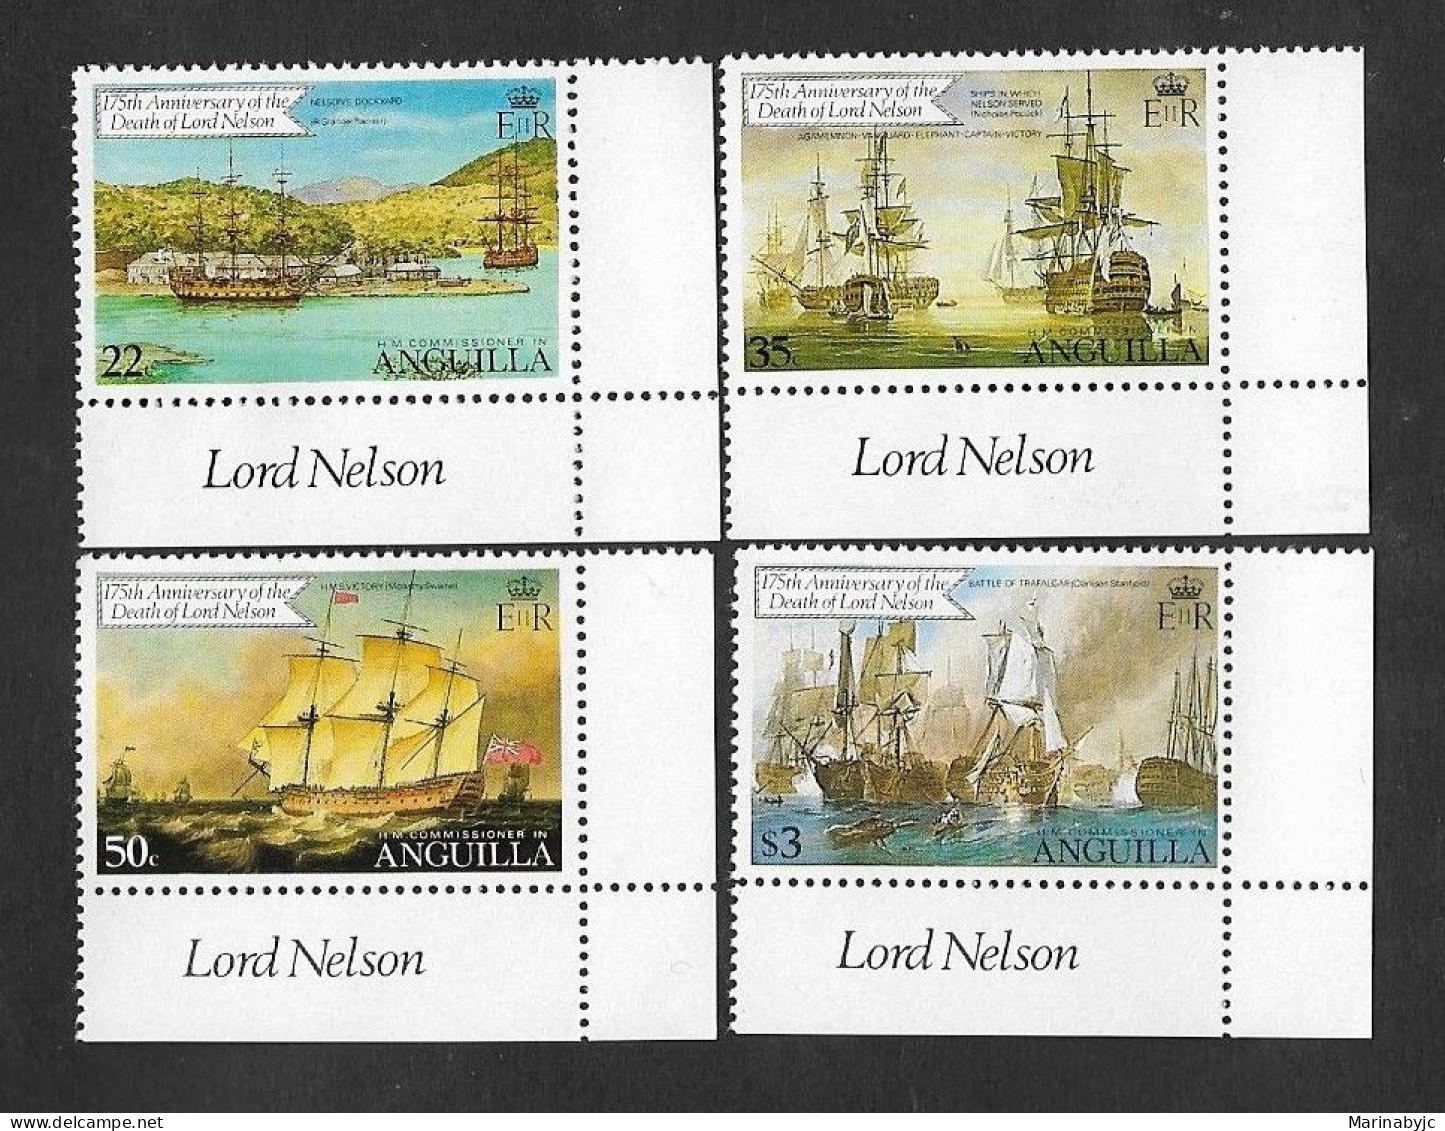 SE)1981 ANGUILLA  175TH ANNIVERSARY OF THE DEATH OF ADMIRAL LORD NELSON, BOATS, SAILBOATS, 4 STAMPS MNH - Anguilla (1968-...)